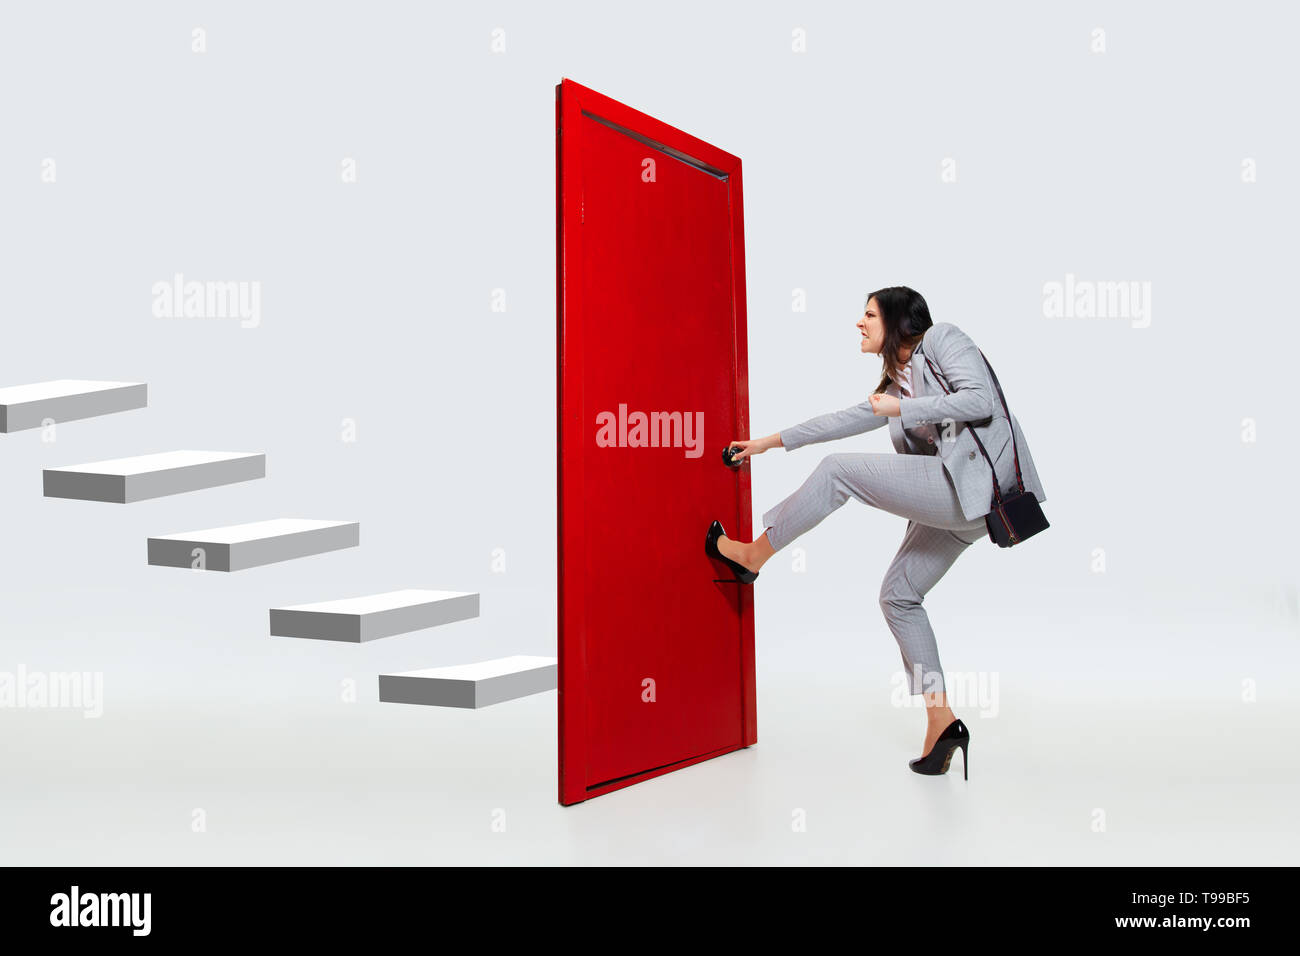 Knocking in emptiness. Young woman in grey suit trying to open the red door in career ladder, but it's closed. No way for motivation. Concept of office worker's troubles, business, problems, stress. Stock Photo